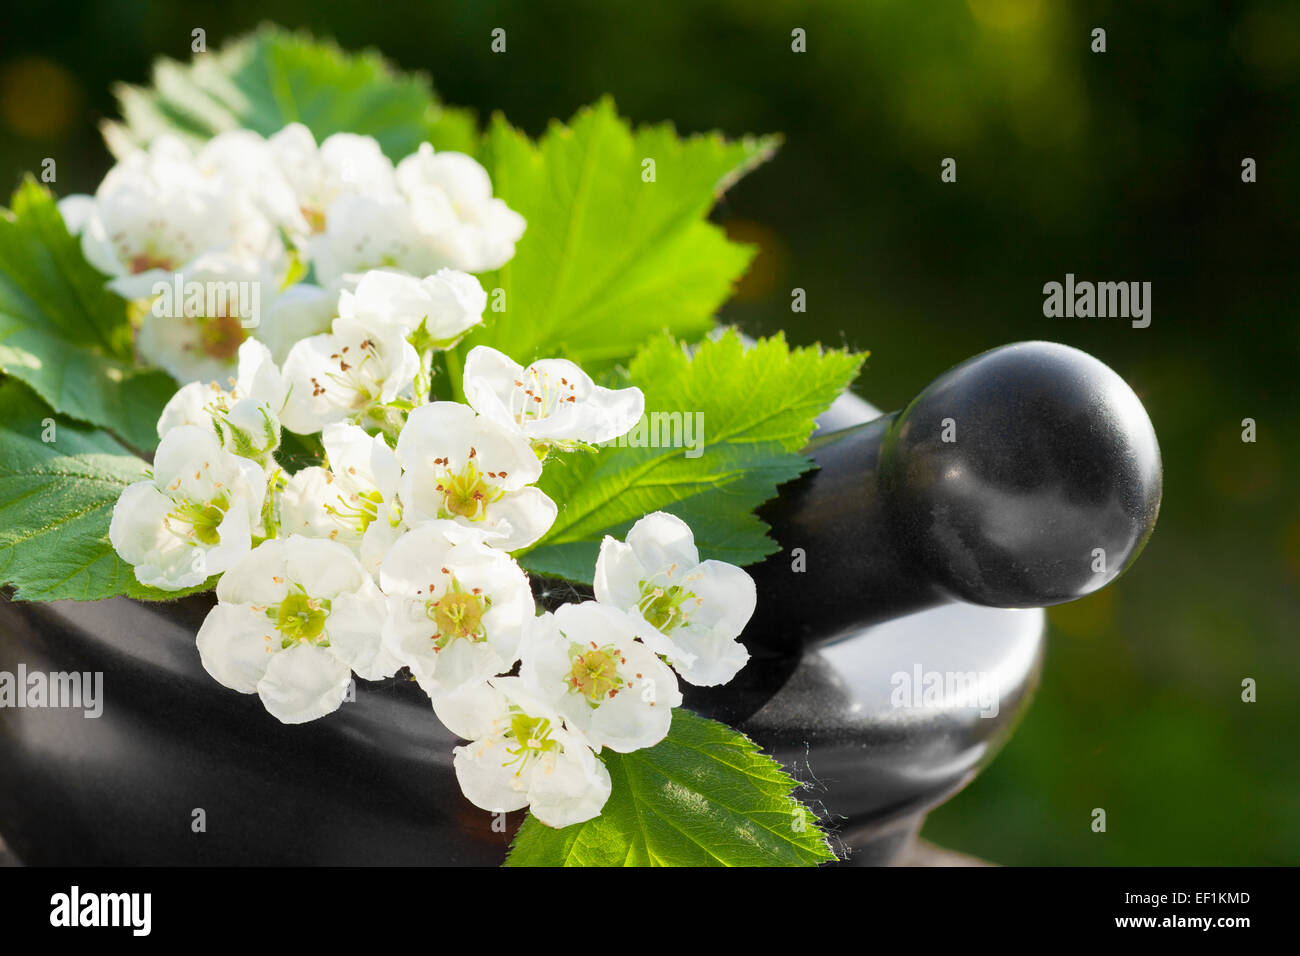 mortar with blossom hawthorn, herbal medicine Stock Photo